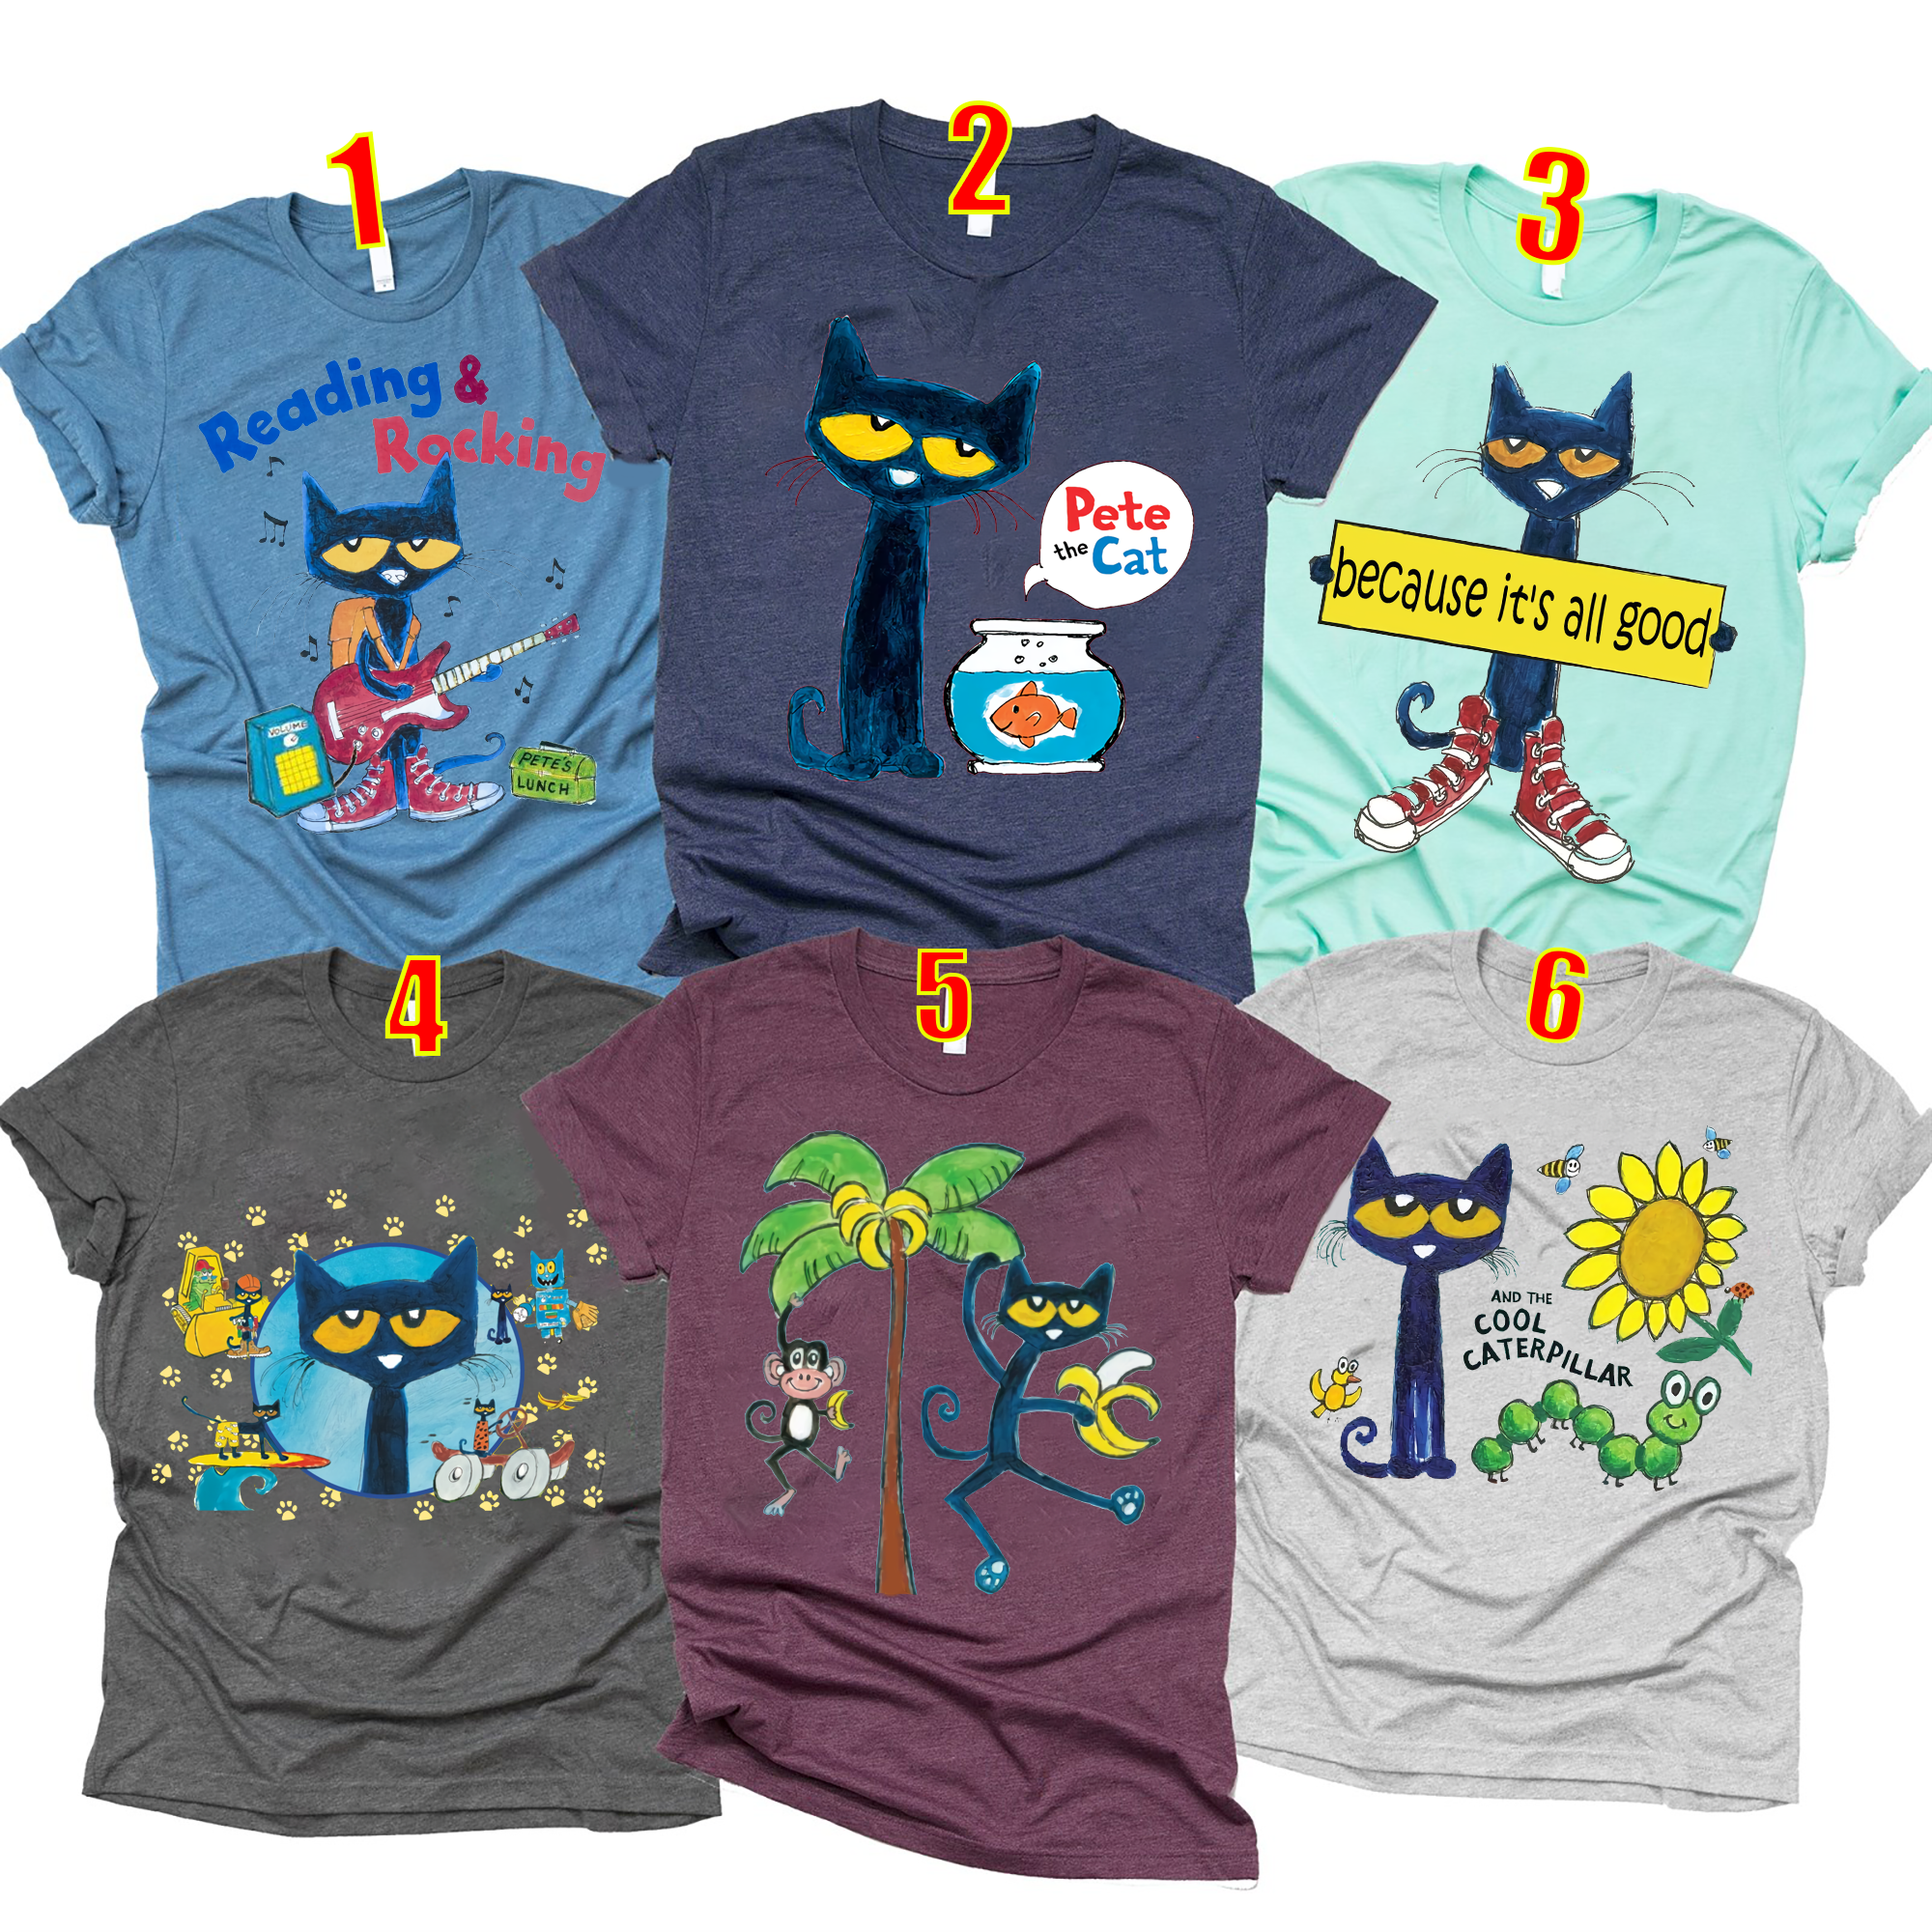 Pete the cat Its All Gravy shirt, A Good Day To Teach Tiny, If you want to be cool Read Books, Kindergarten Teacher shirt K,back to school